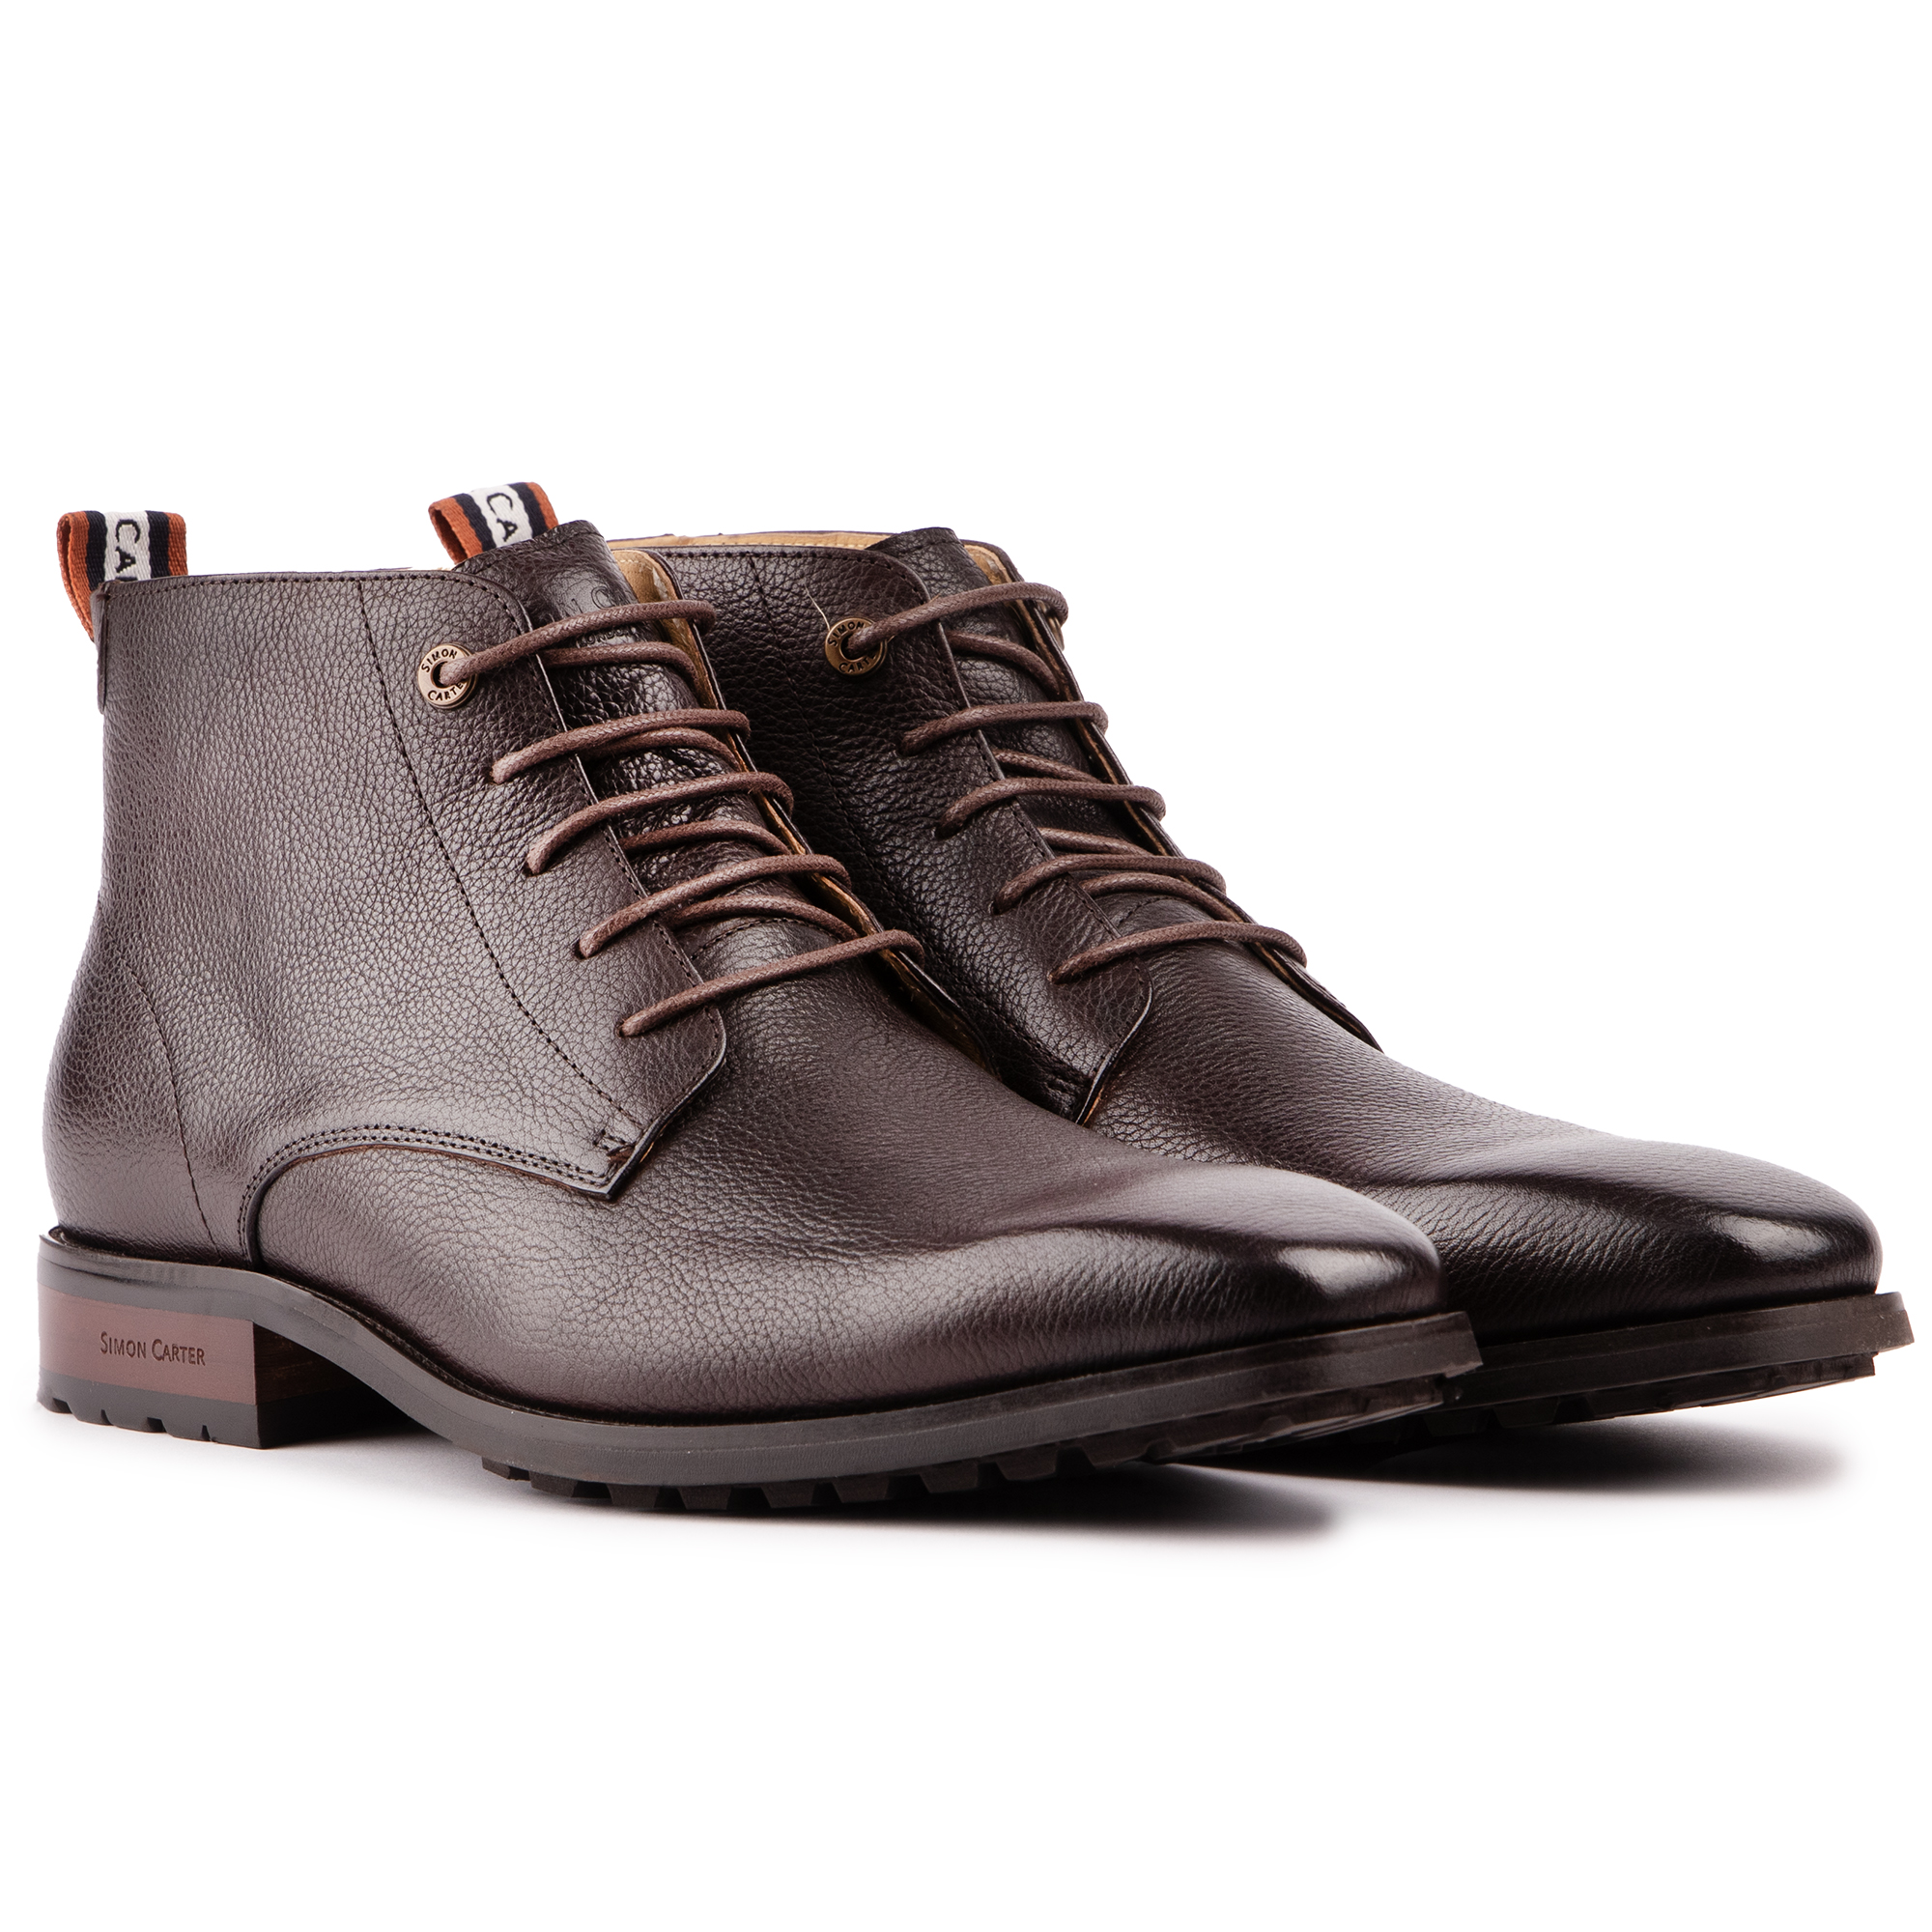 SIMON CARTER Mens Daisy Lace Up Ankle Boots Brown